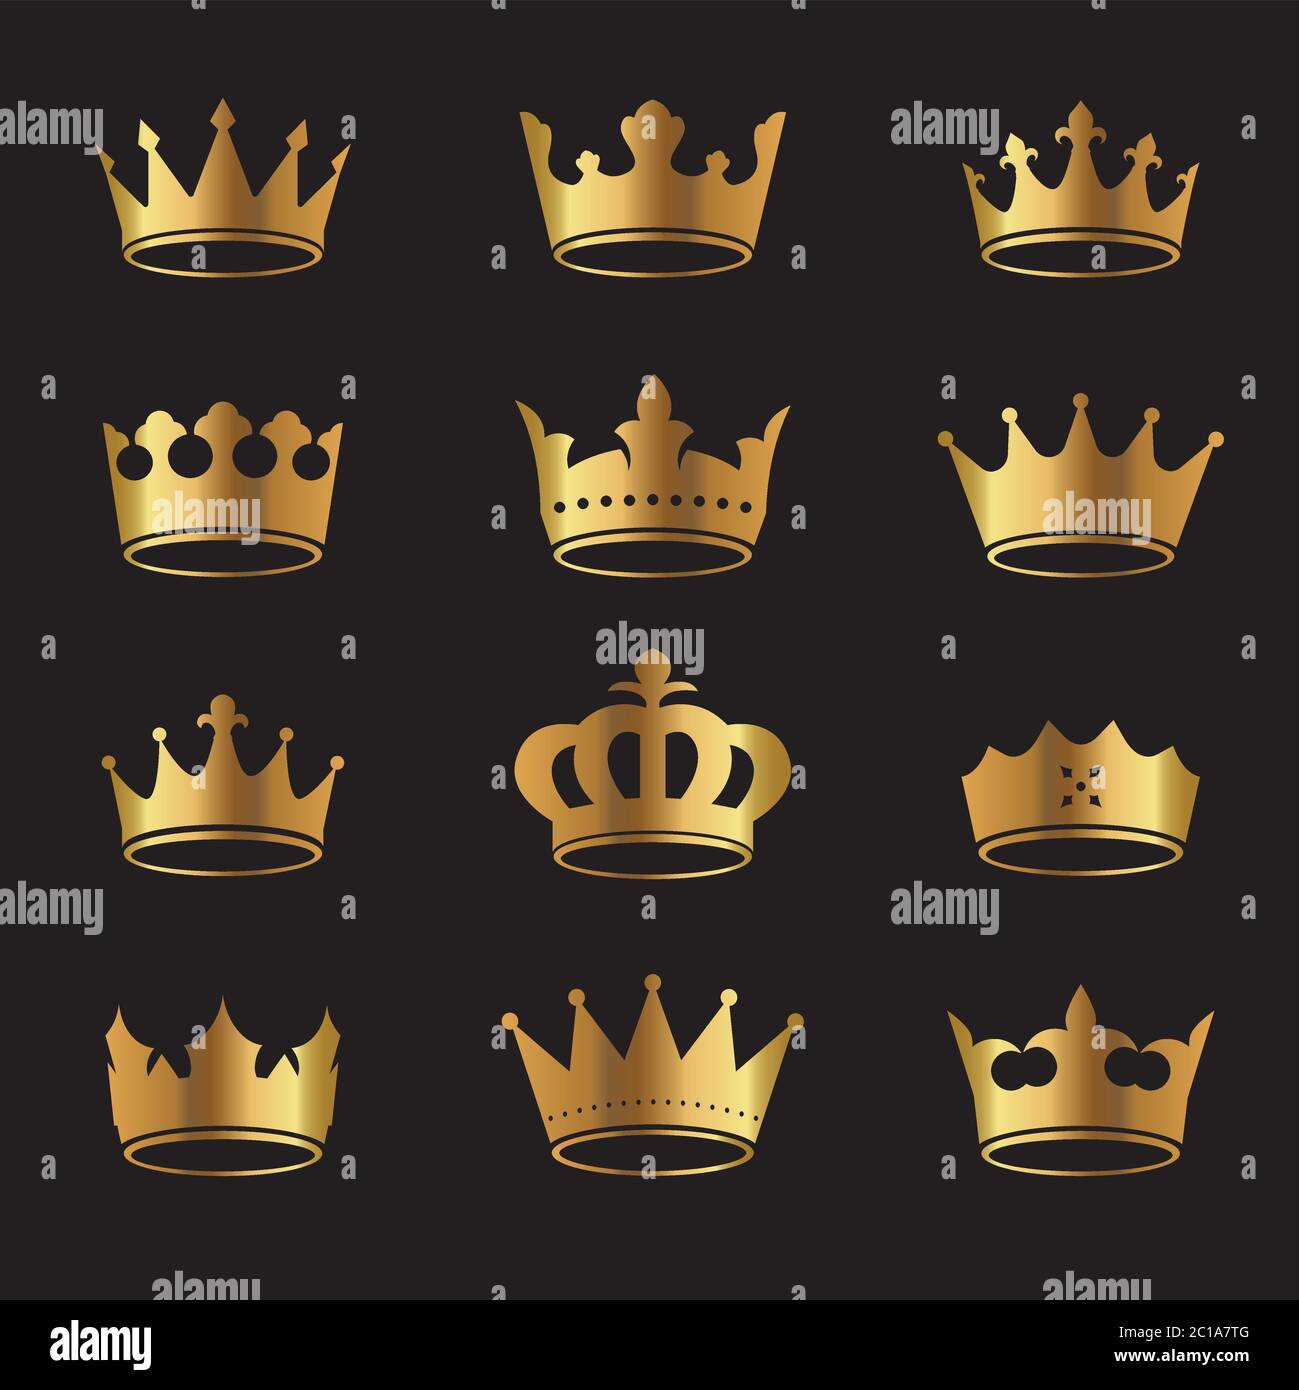 Set Of Golden Vector King Crowns And Icon On Black Background Vector